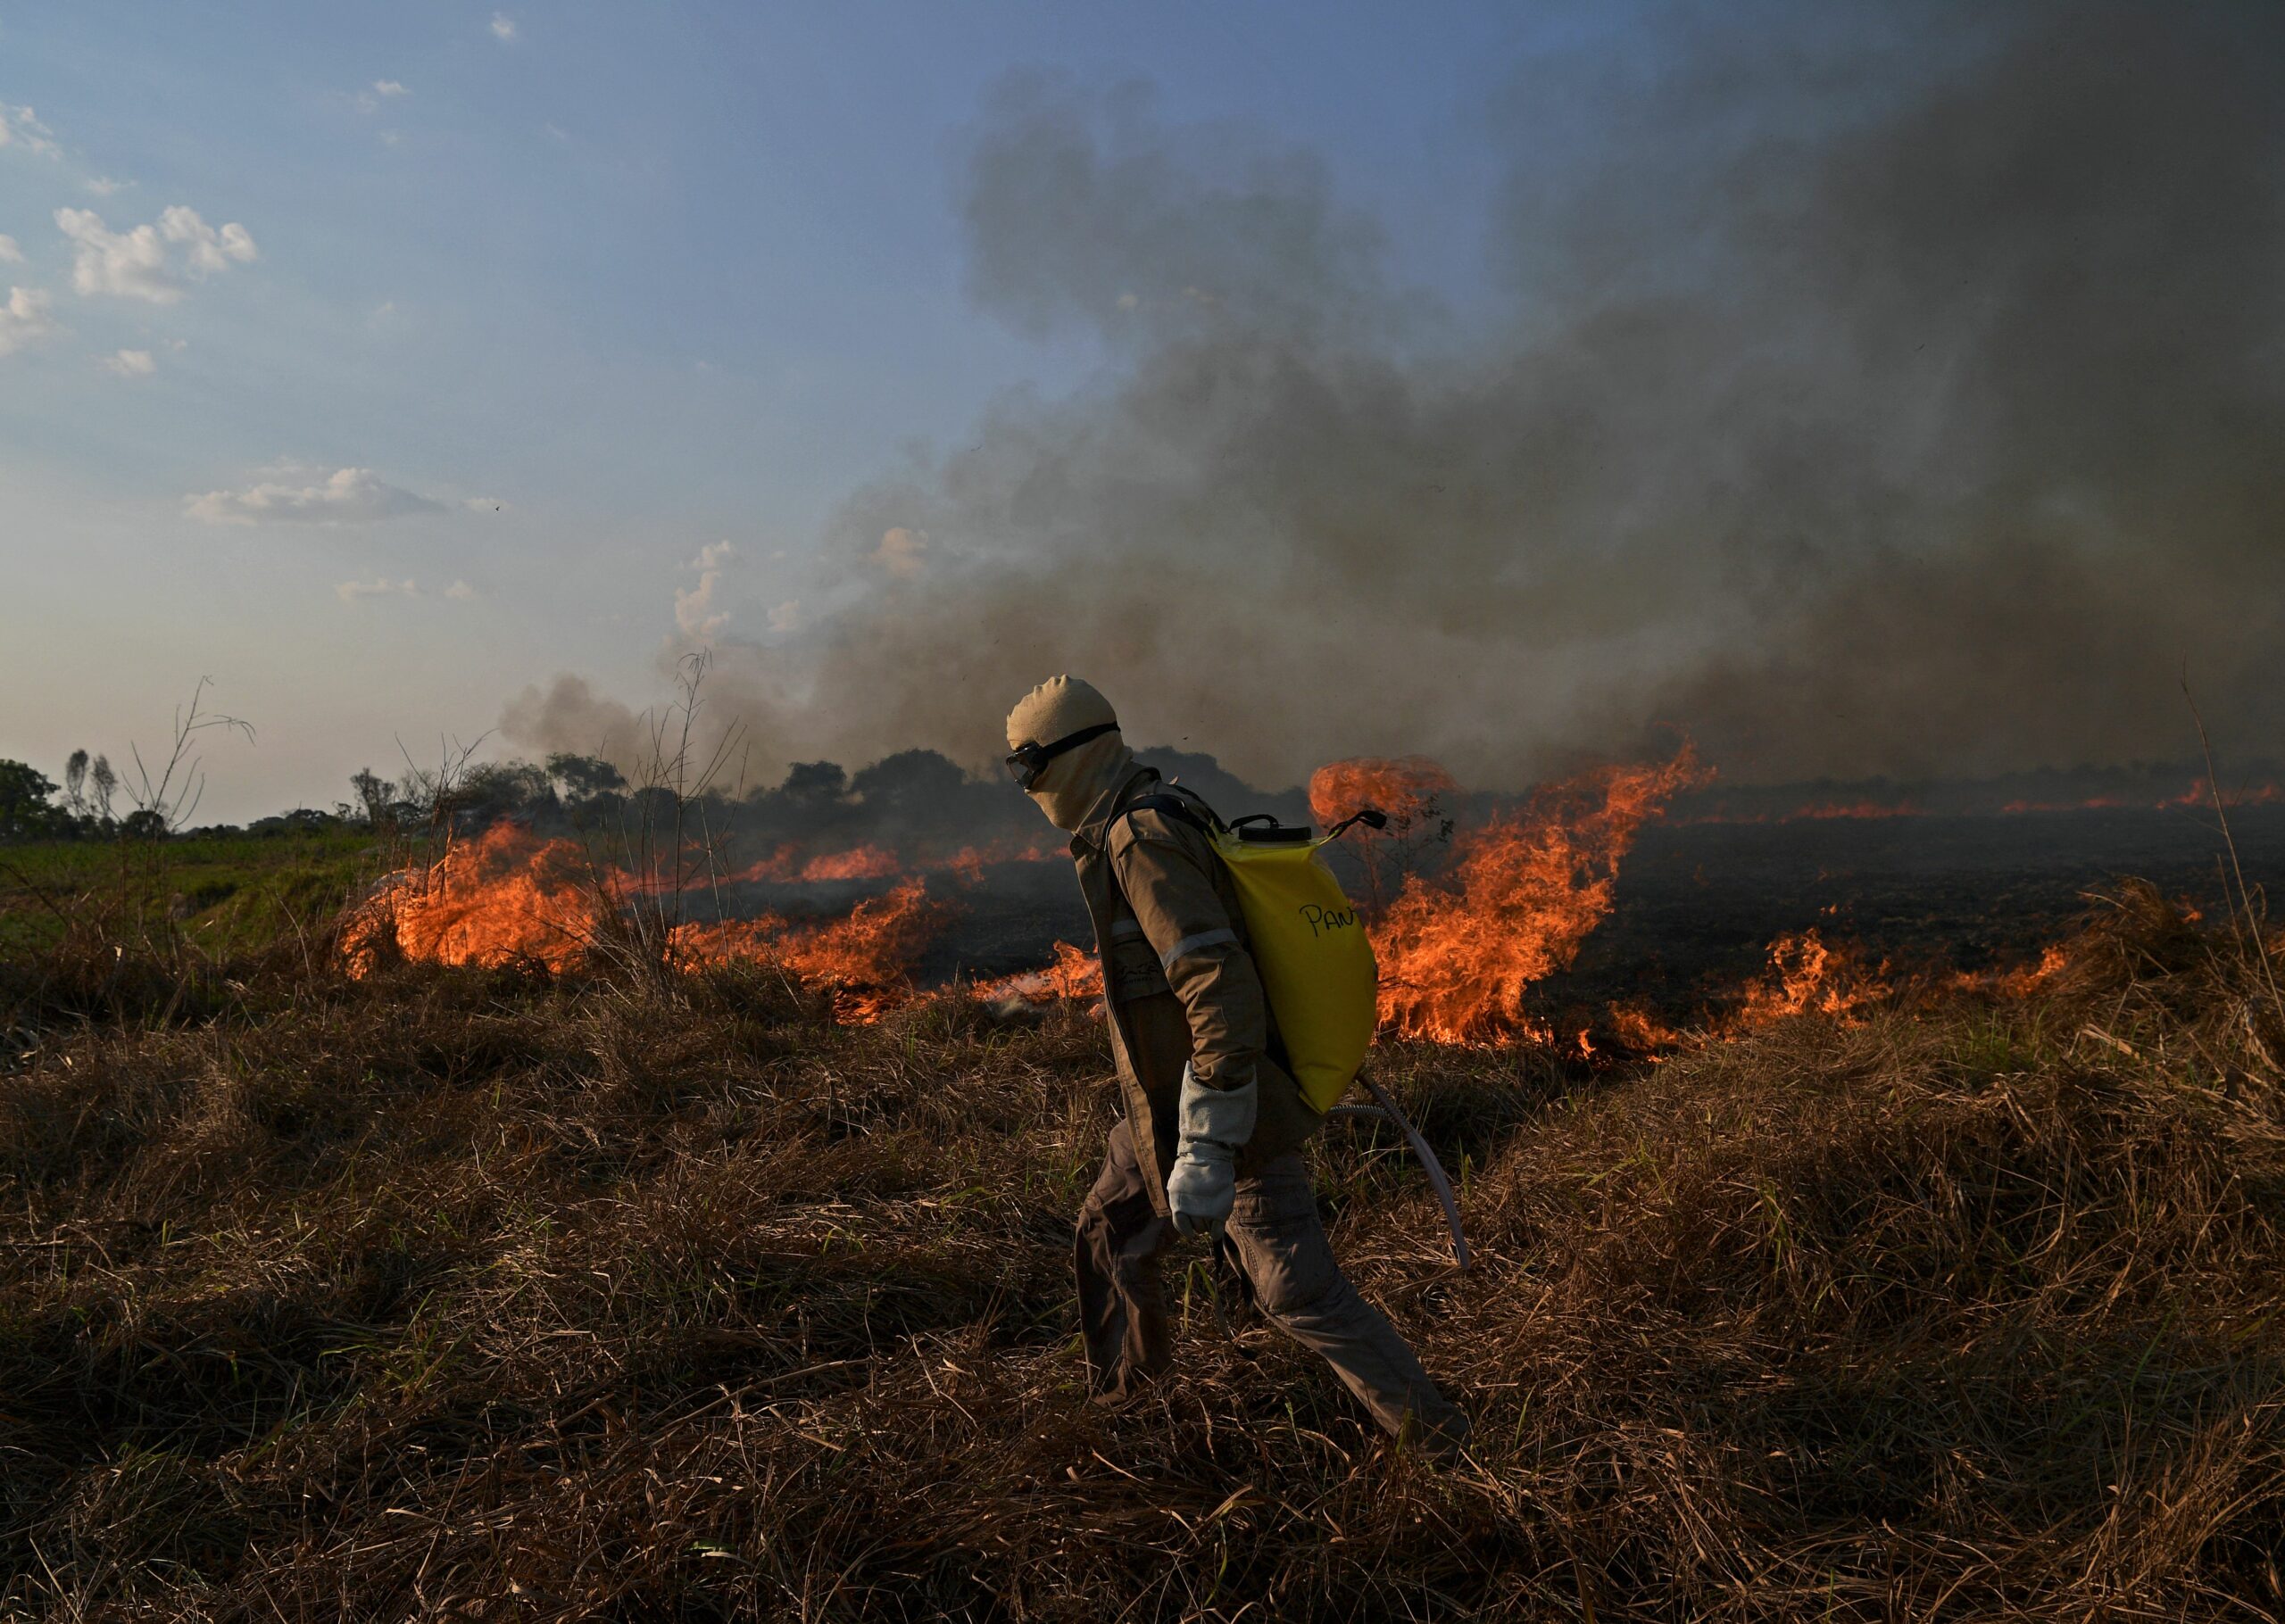 A conservationist with the NGO Panthera fights a fire in Porto Jofre, the Pantanal of Mato Grosso state, Brazil, on September 4, 2021. The Amazon, home to more than three million species, has long absorbed large amounts of carbon dioxide emissions, but some research has shown it recently emitting more CO2 than it absorbs due to wildfires, deforestation and declining forest health. Credit: Carl De Souza/AFP via Getty Images